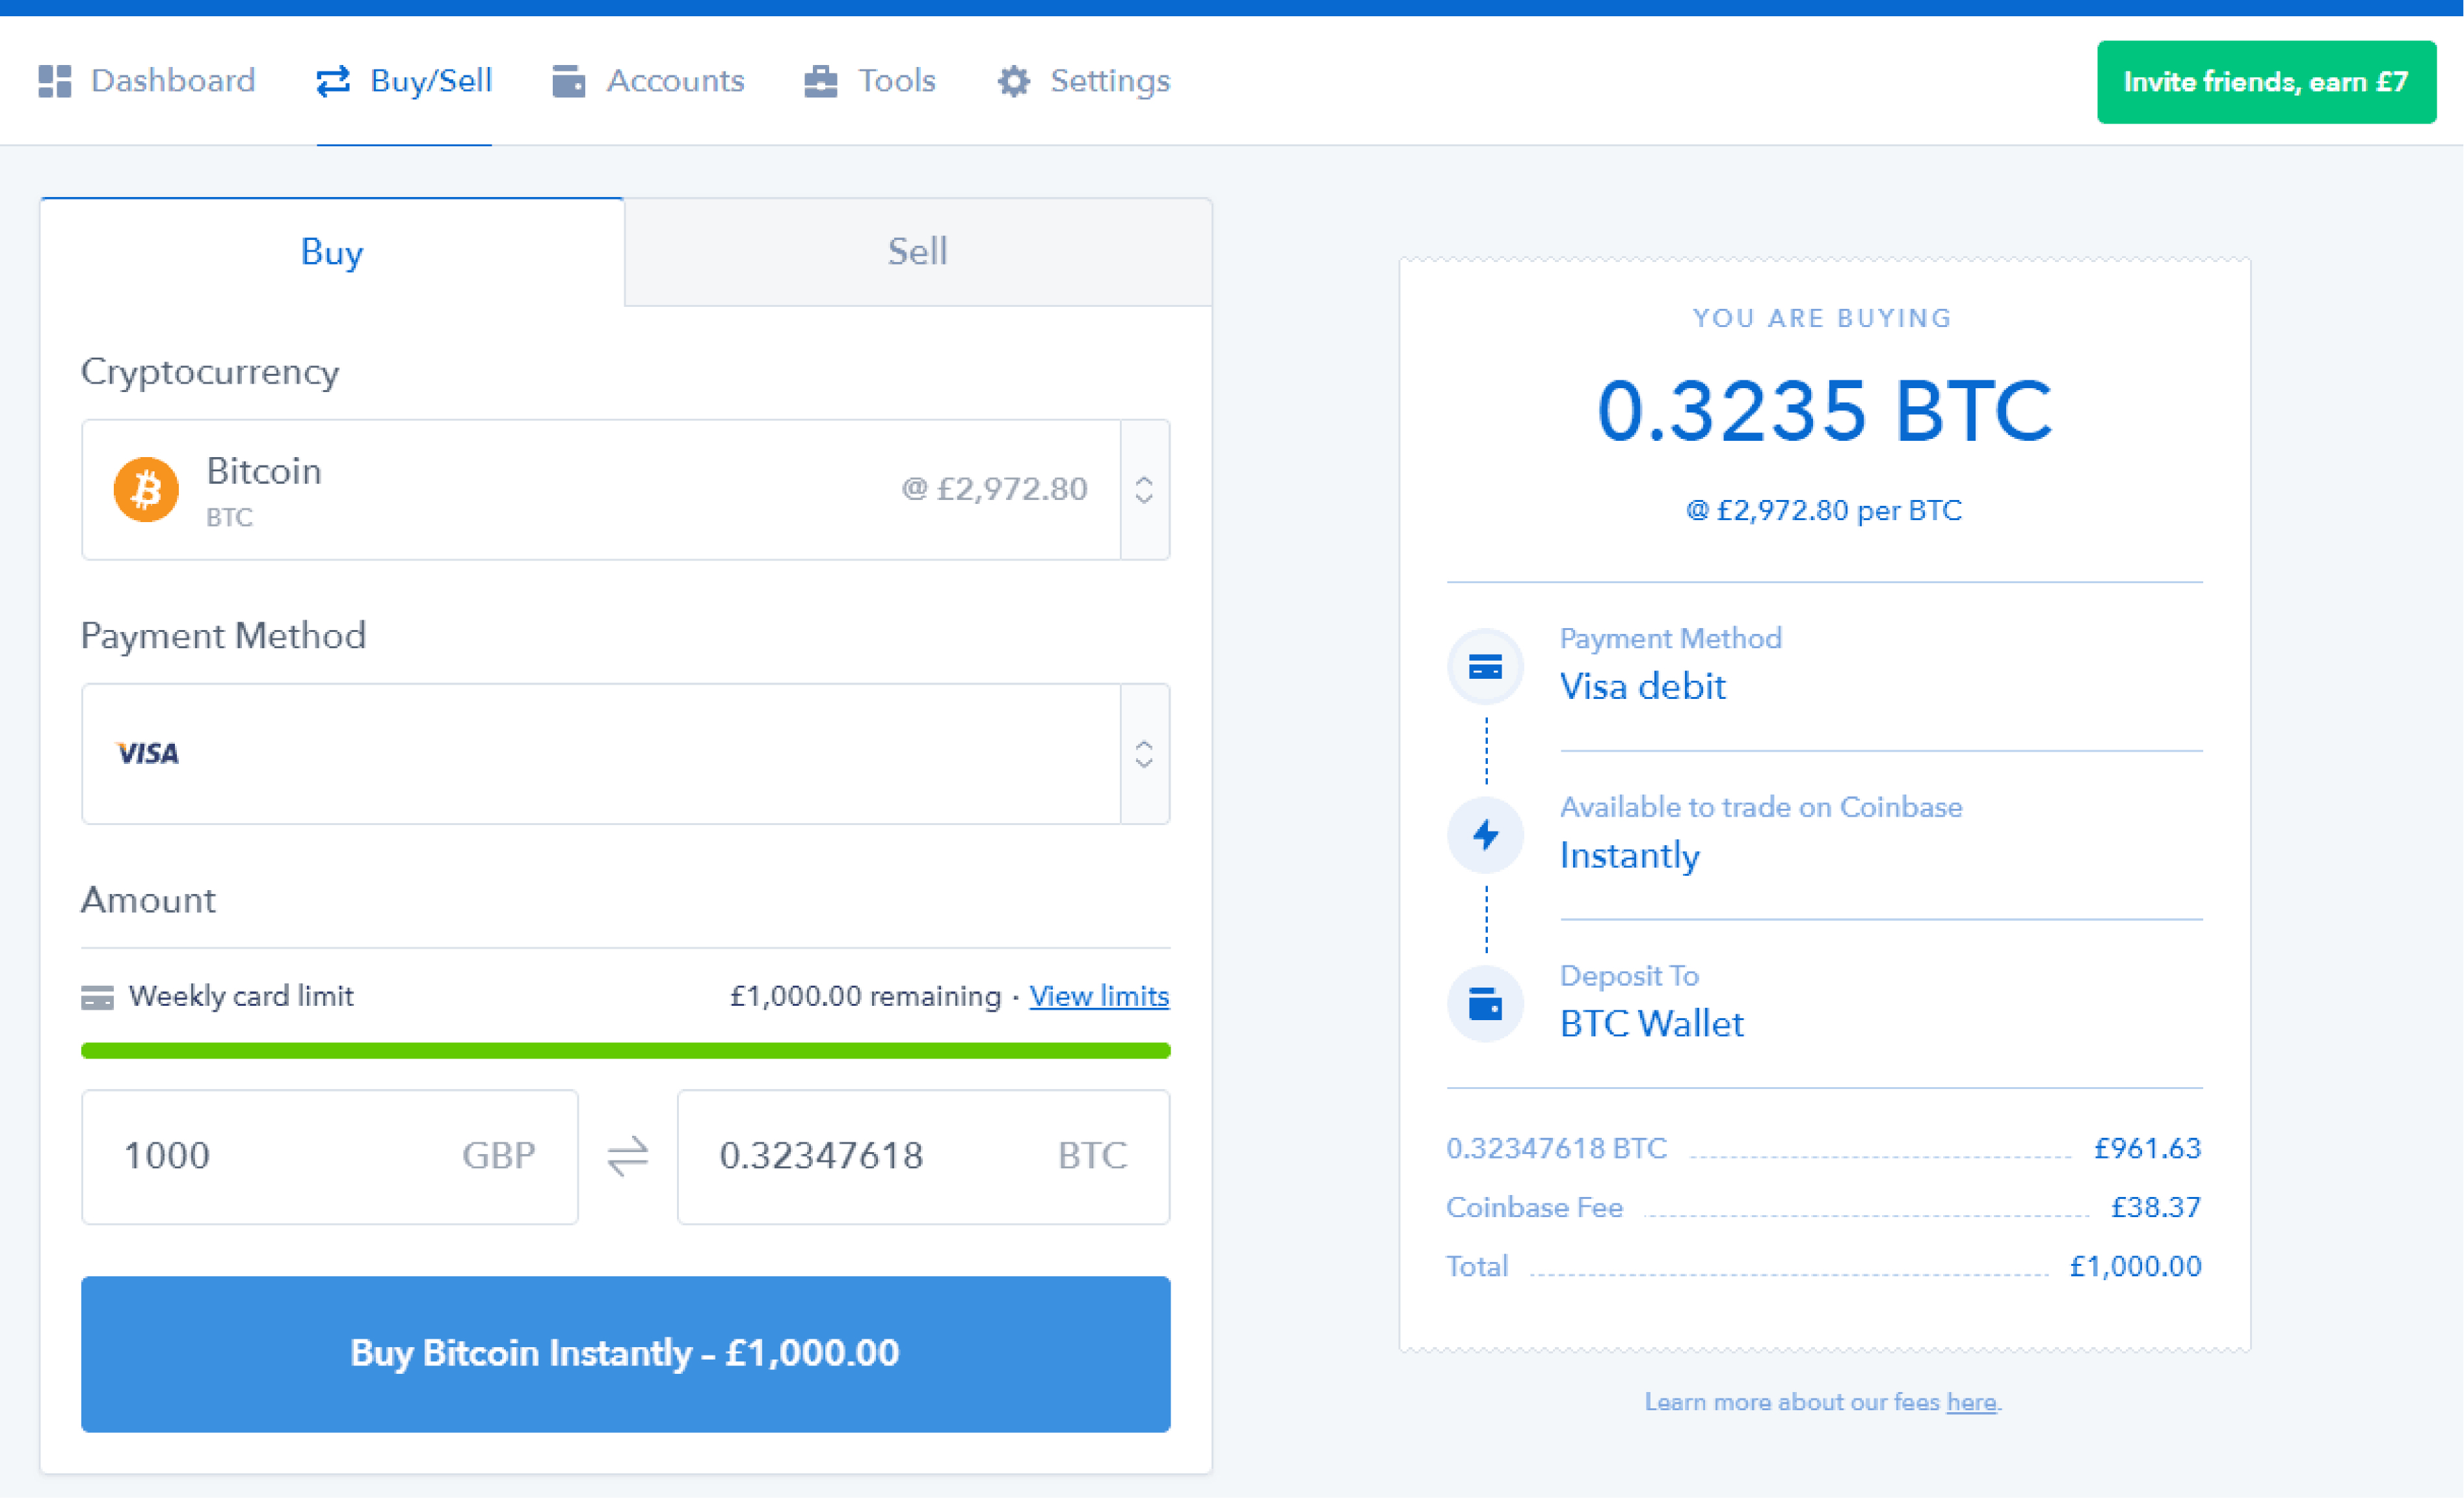 cant get into coinbase account